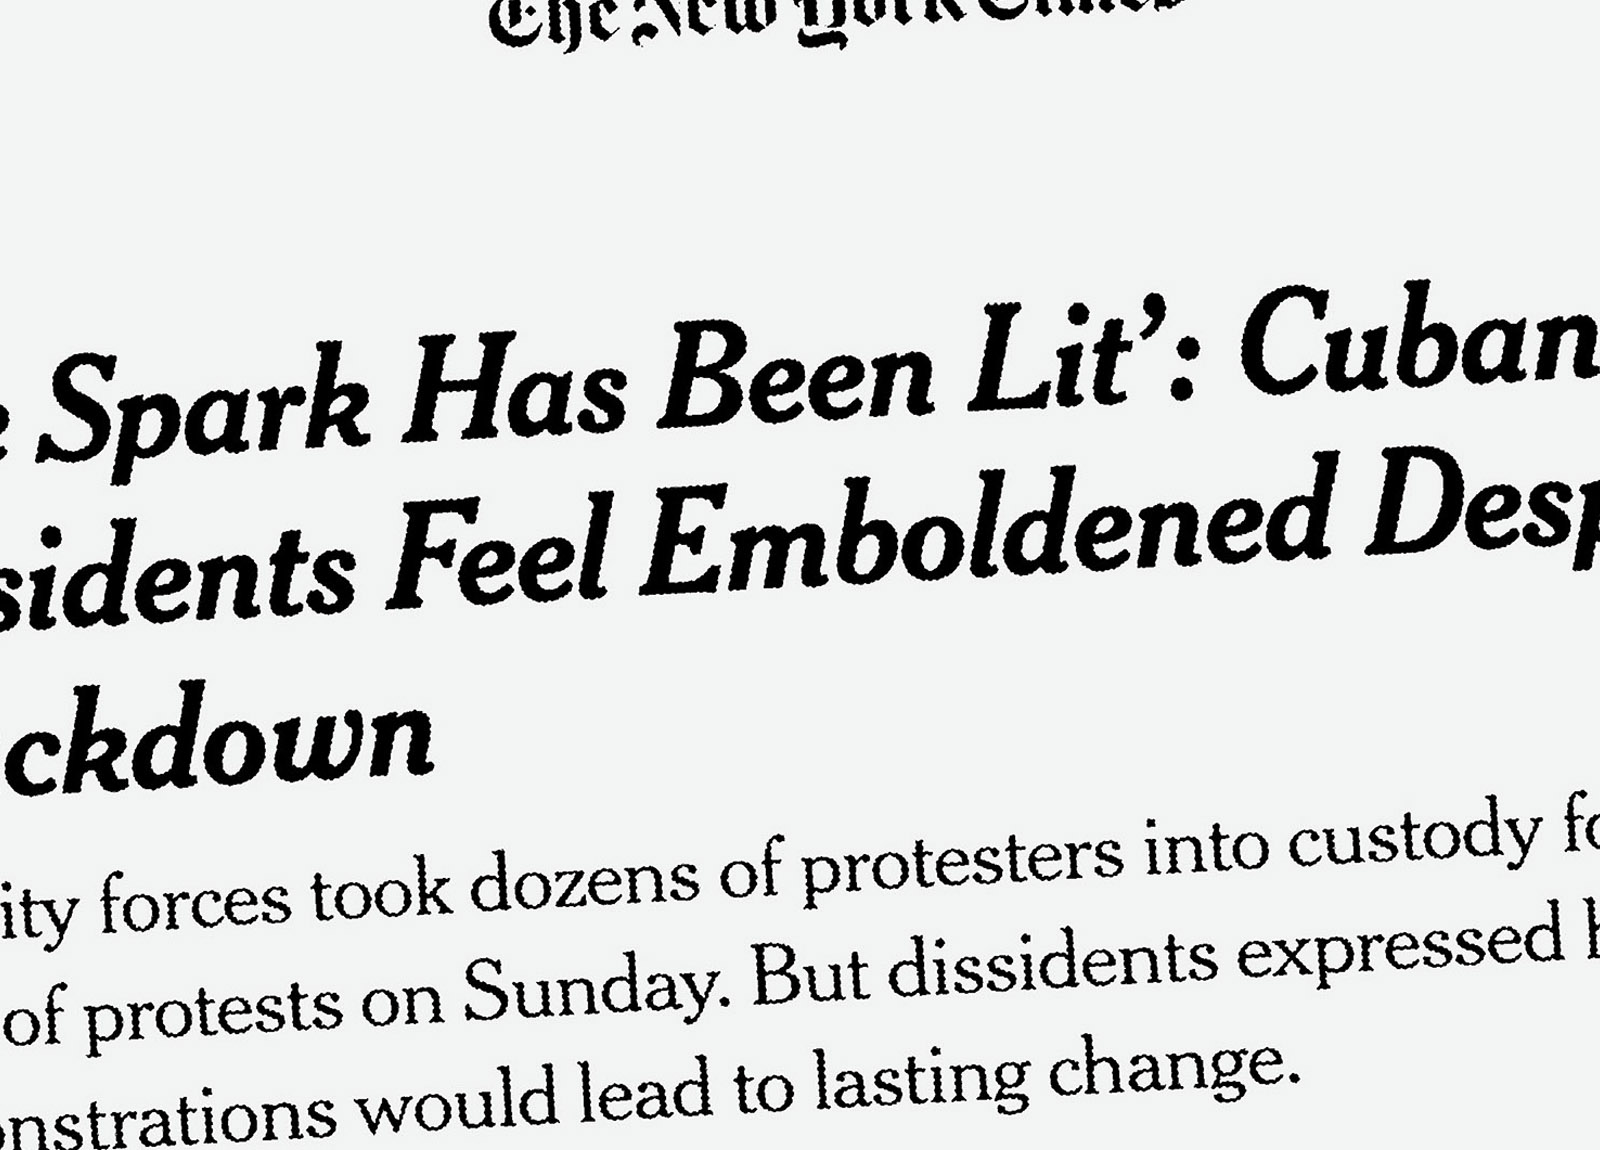 Illustration:
A New York Times headline, taken from its website, is blown up so that it extends beyond the edges of the frame. The headline reads: “The Spark Has Been Lit: Cuban Dissidents Feel Emboldened Despite Crackdown.”